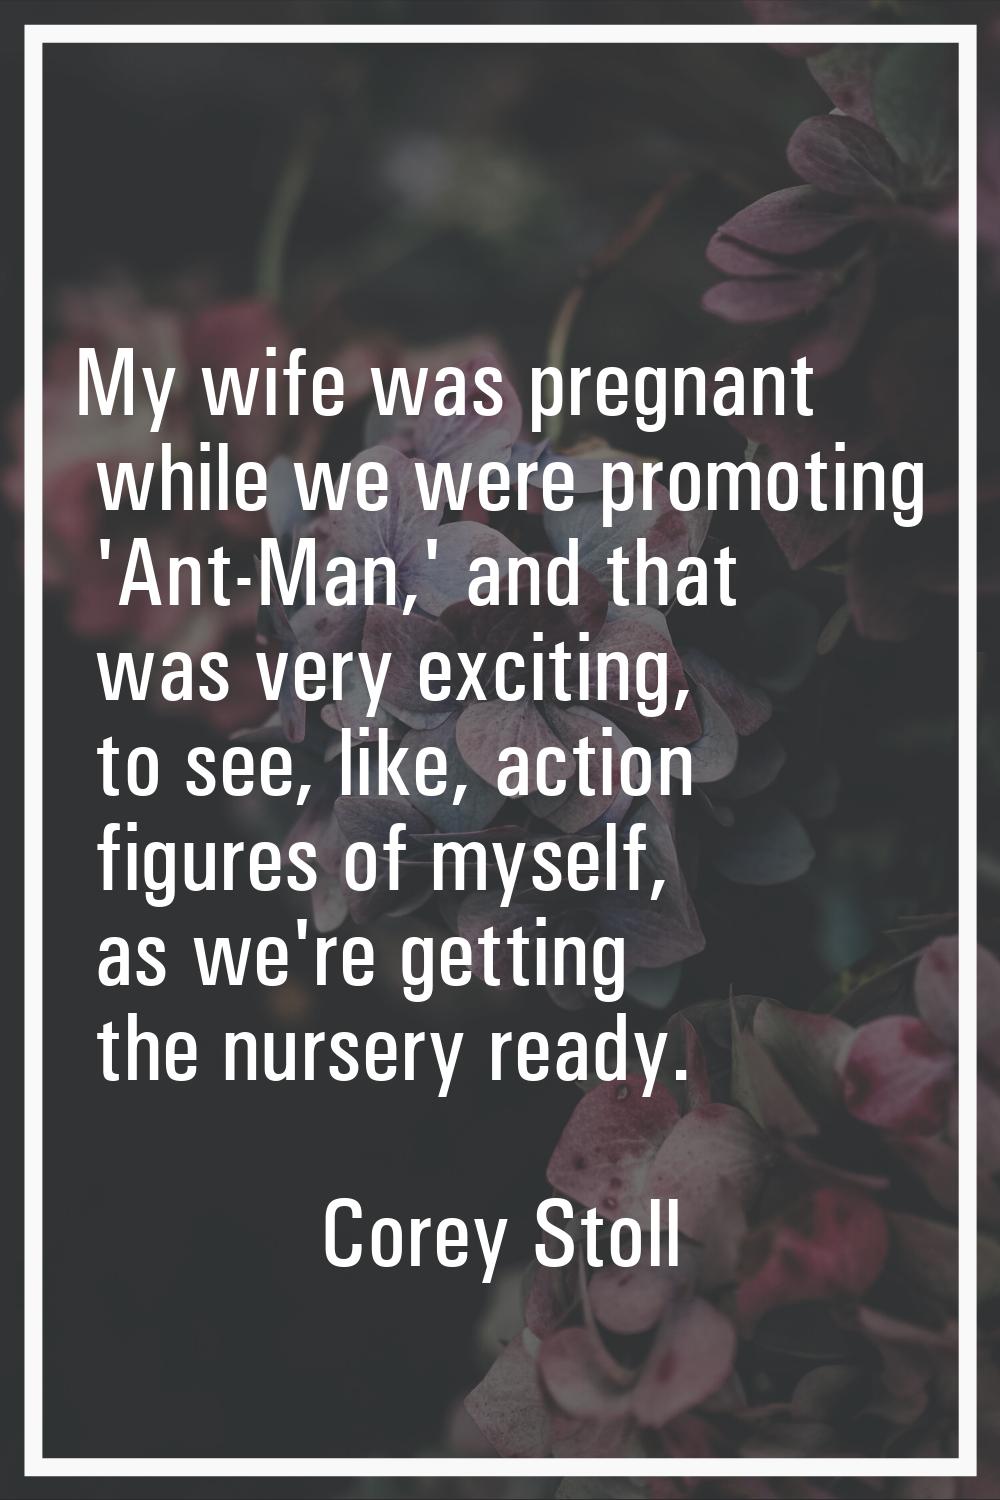 My wife was pregnant while we were promoting 'Ant-Man,' and that was very exciting, to see, like, a